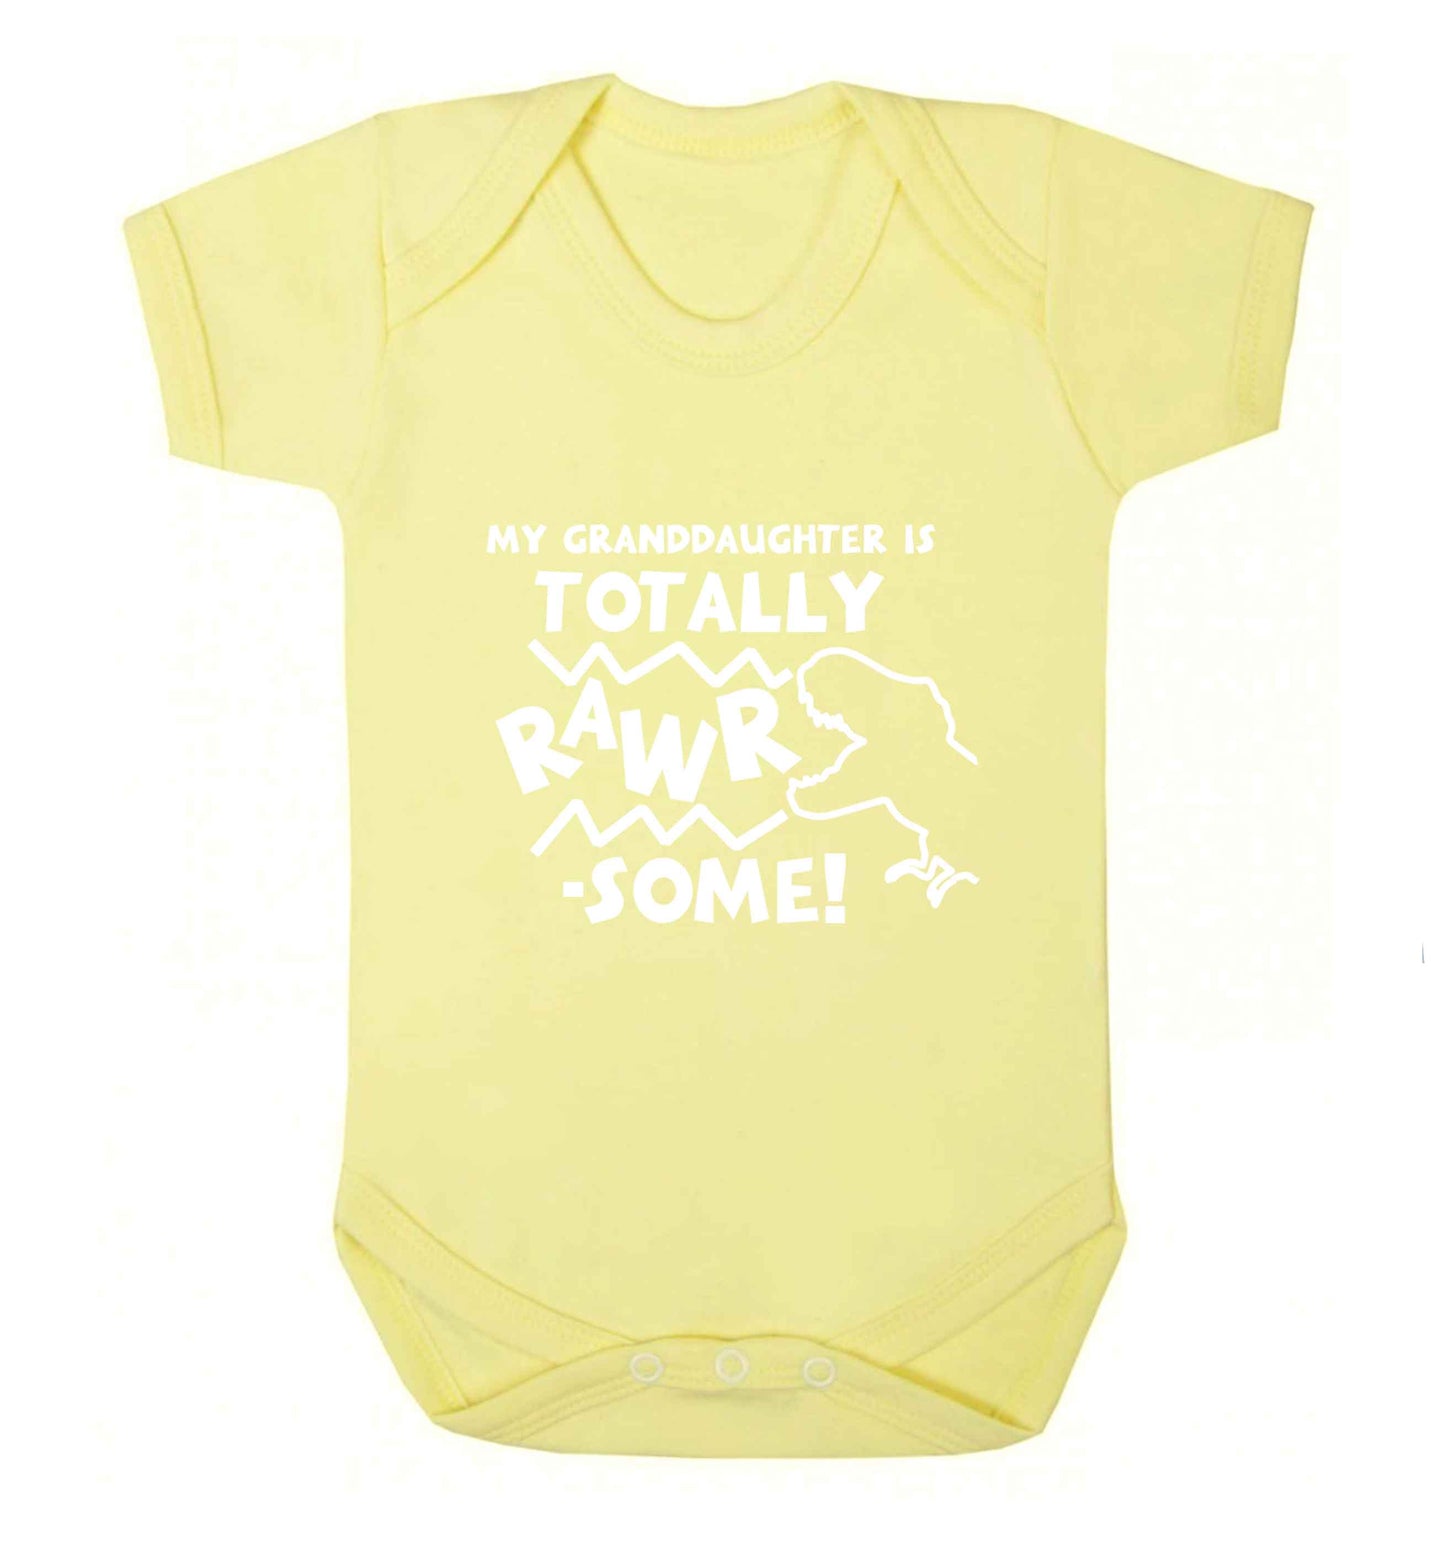 My granddaughter is totally rawrsome baby vest pale yellow 18-24 months